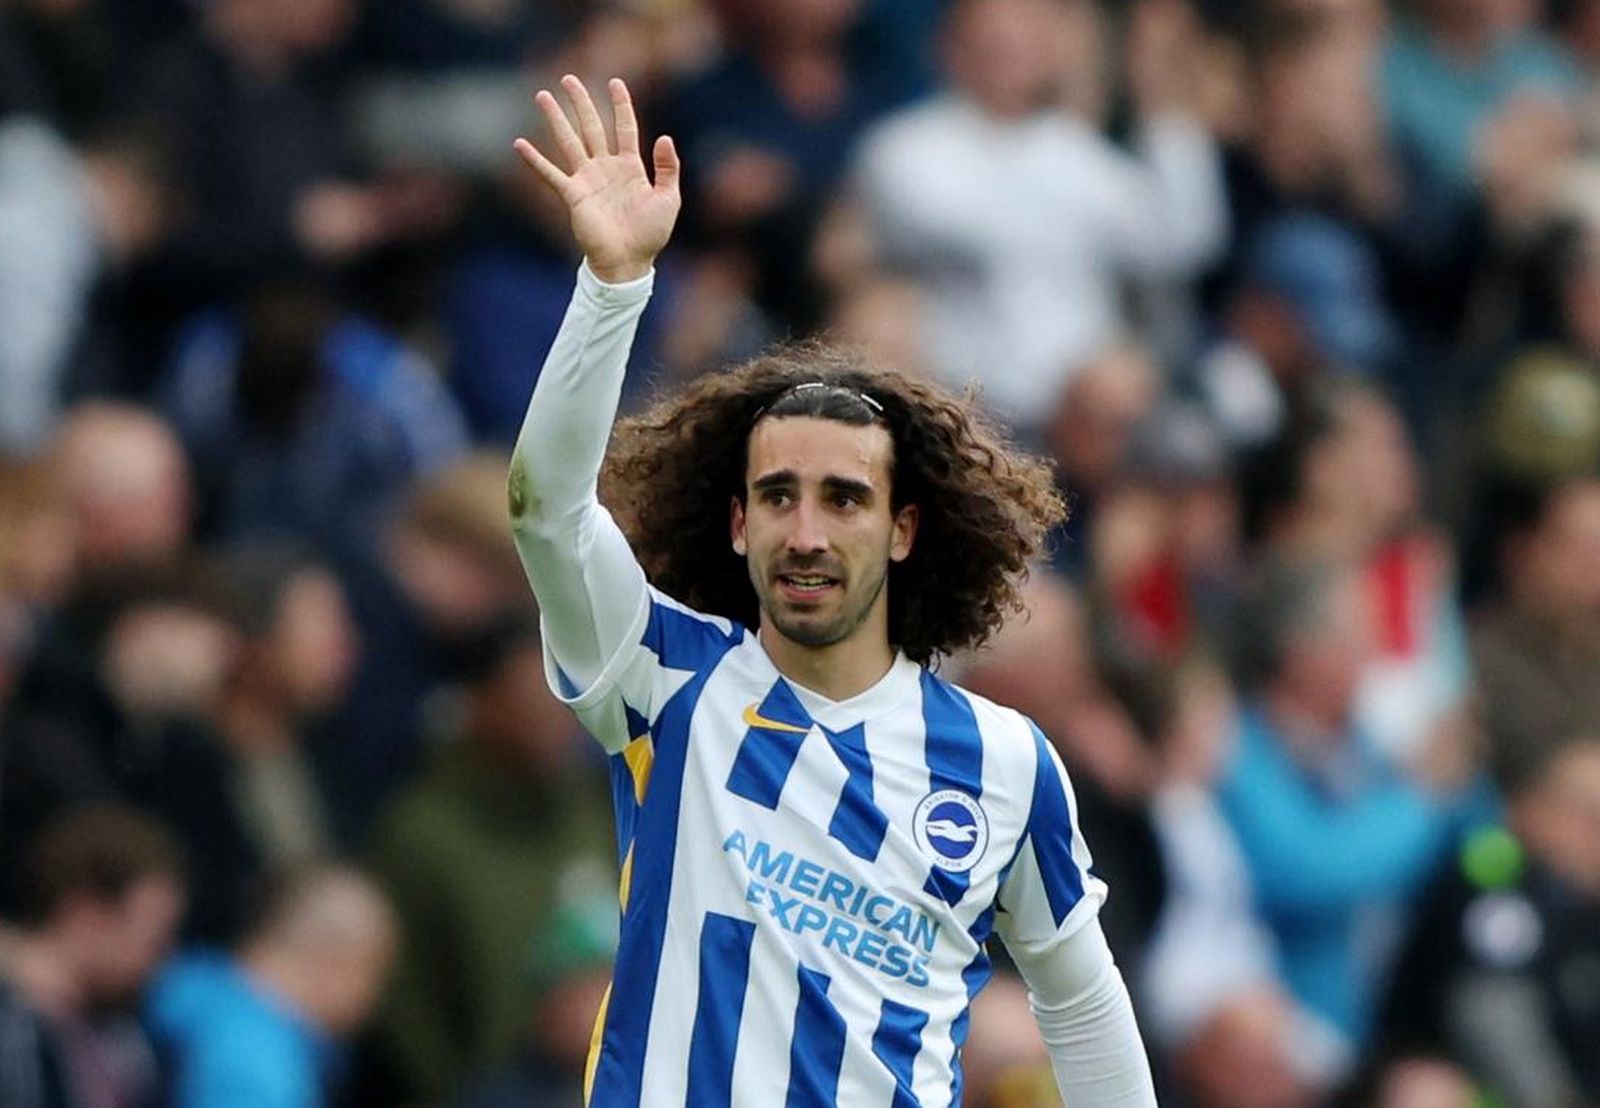 Soccer Football - Premier League - Brighton & Hove Albion v Manchester United - The American Express Community Stadium, Brighton, Britain - May 7, 2022 Brighton & Hove Albion's Marc Cucurella celebrates scoring their second goal REUTERS/Ian Walton EDITORIAL USE ONLY. No use with unauthorized audio, video, data, fixture lists, club/league logos or 'live' services. Online in-match use limited to 75 images, no video emulation. No use in betting, games or single club /league/player publications.  Please contact your account representative for further details. Photo: Ian Walton/REUTERS